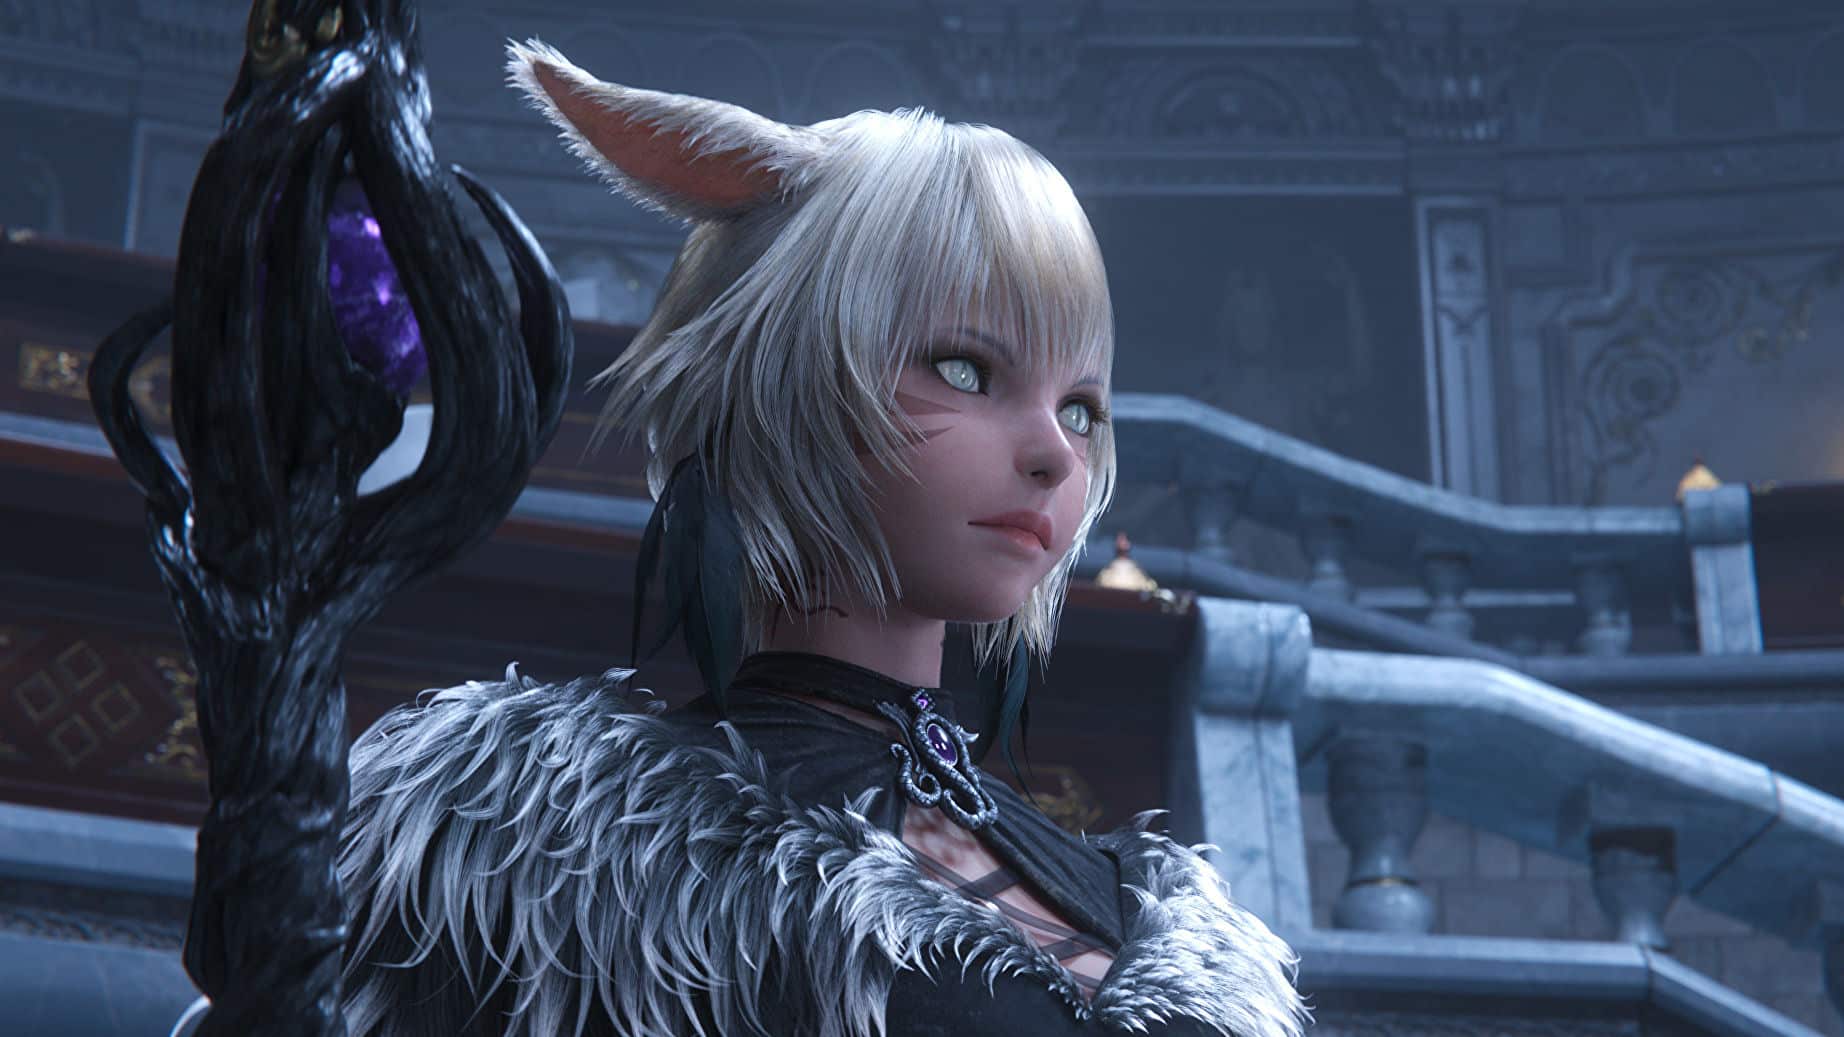 Final Fantasy XIV sales back online, new players can now play again